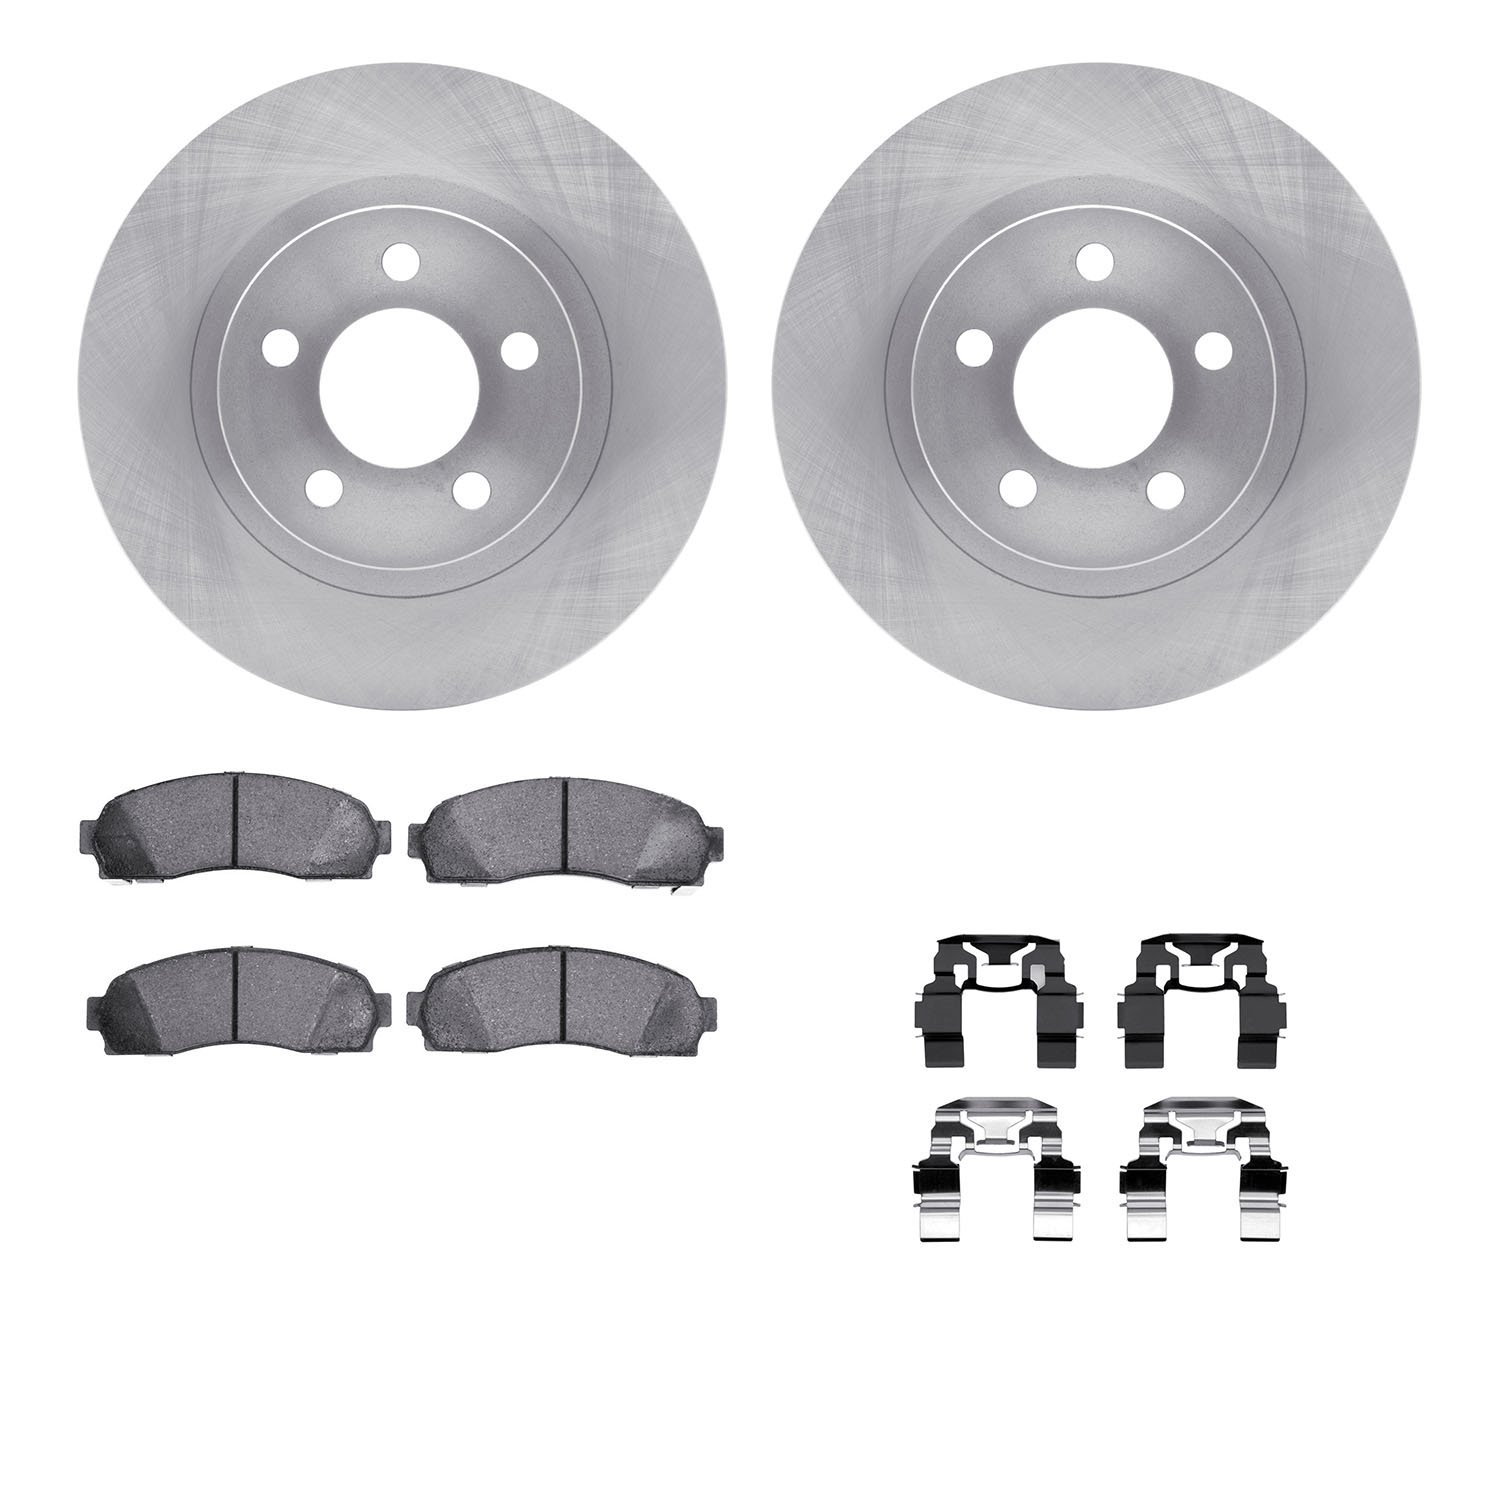 6412-54170 Brake Rotors with Ultimate-Duty Brake Pads Kit & Hardware, 2001-2005 Ford/Lincoln/Mercury/Mazda, Position: Front